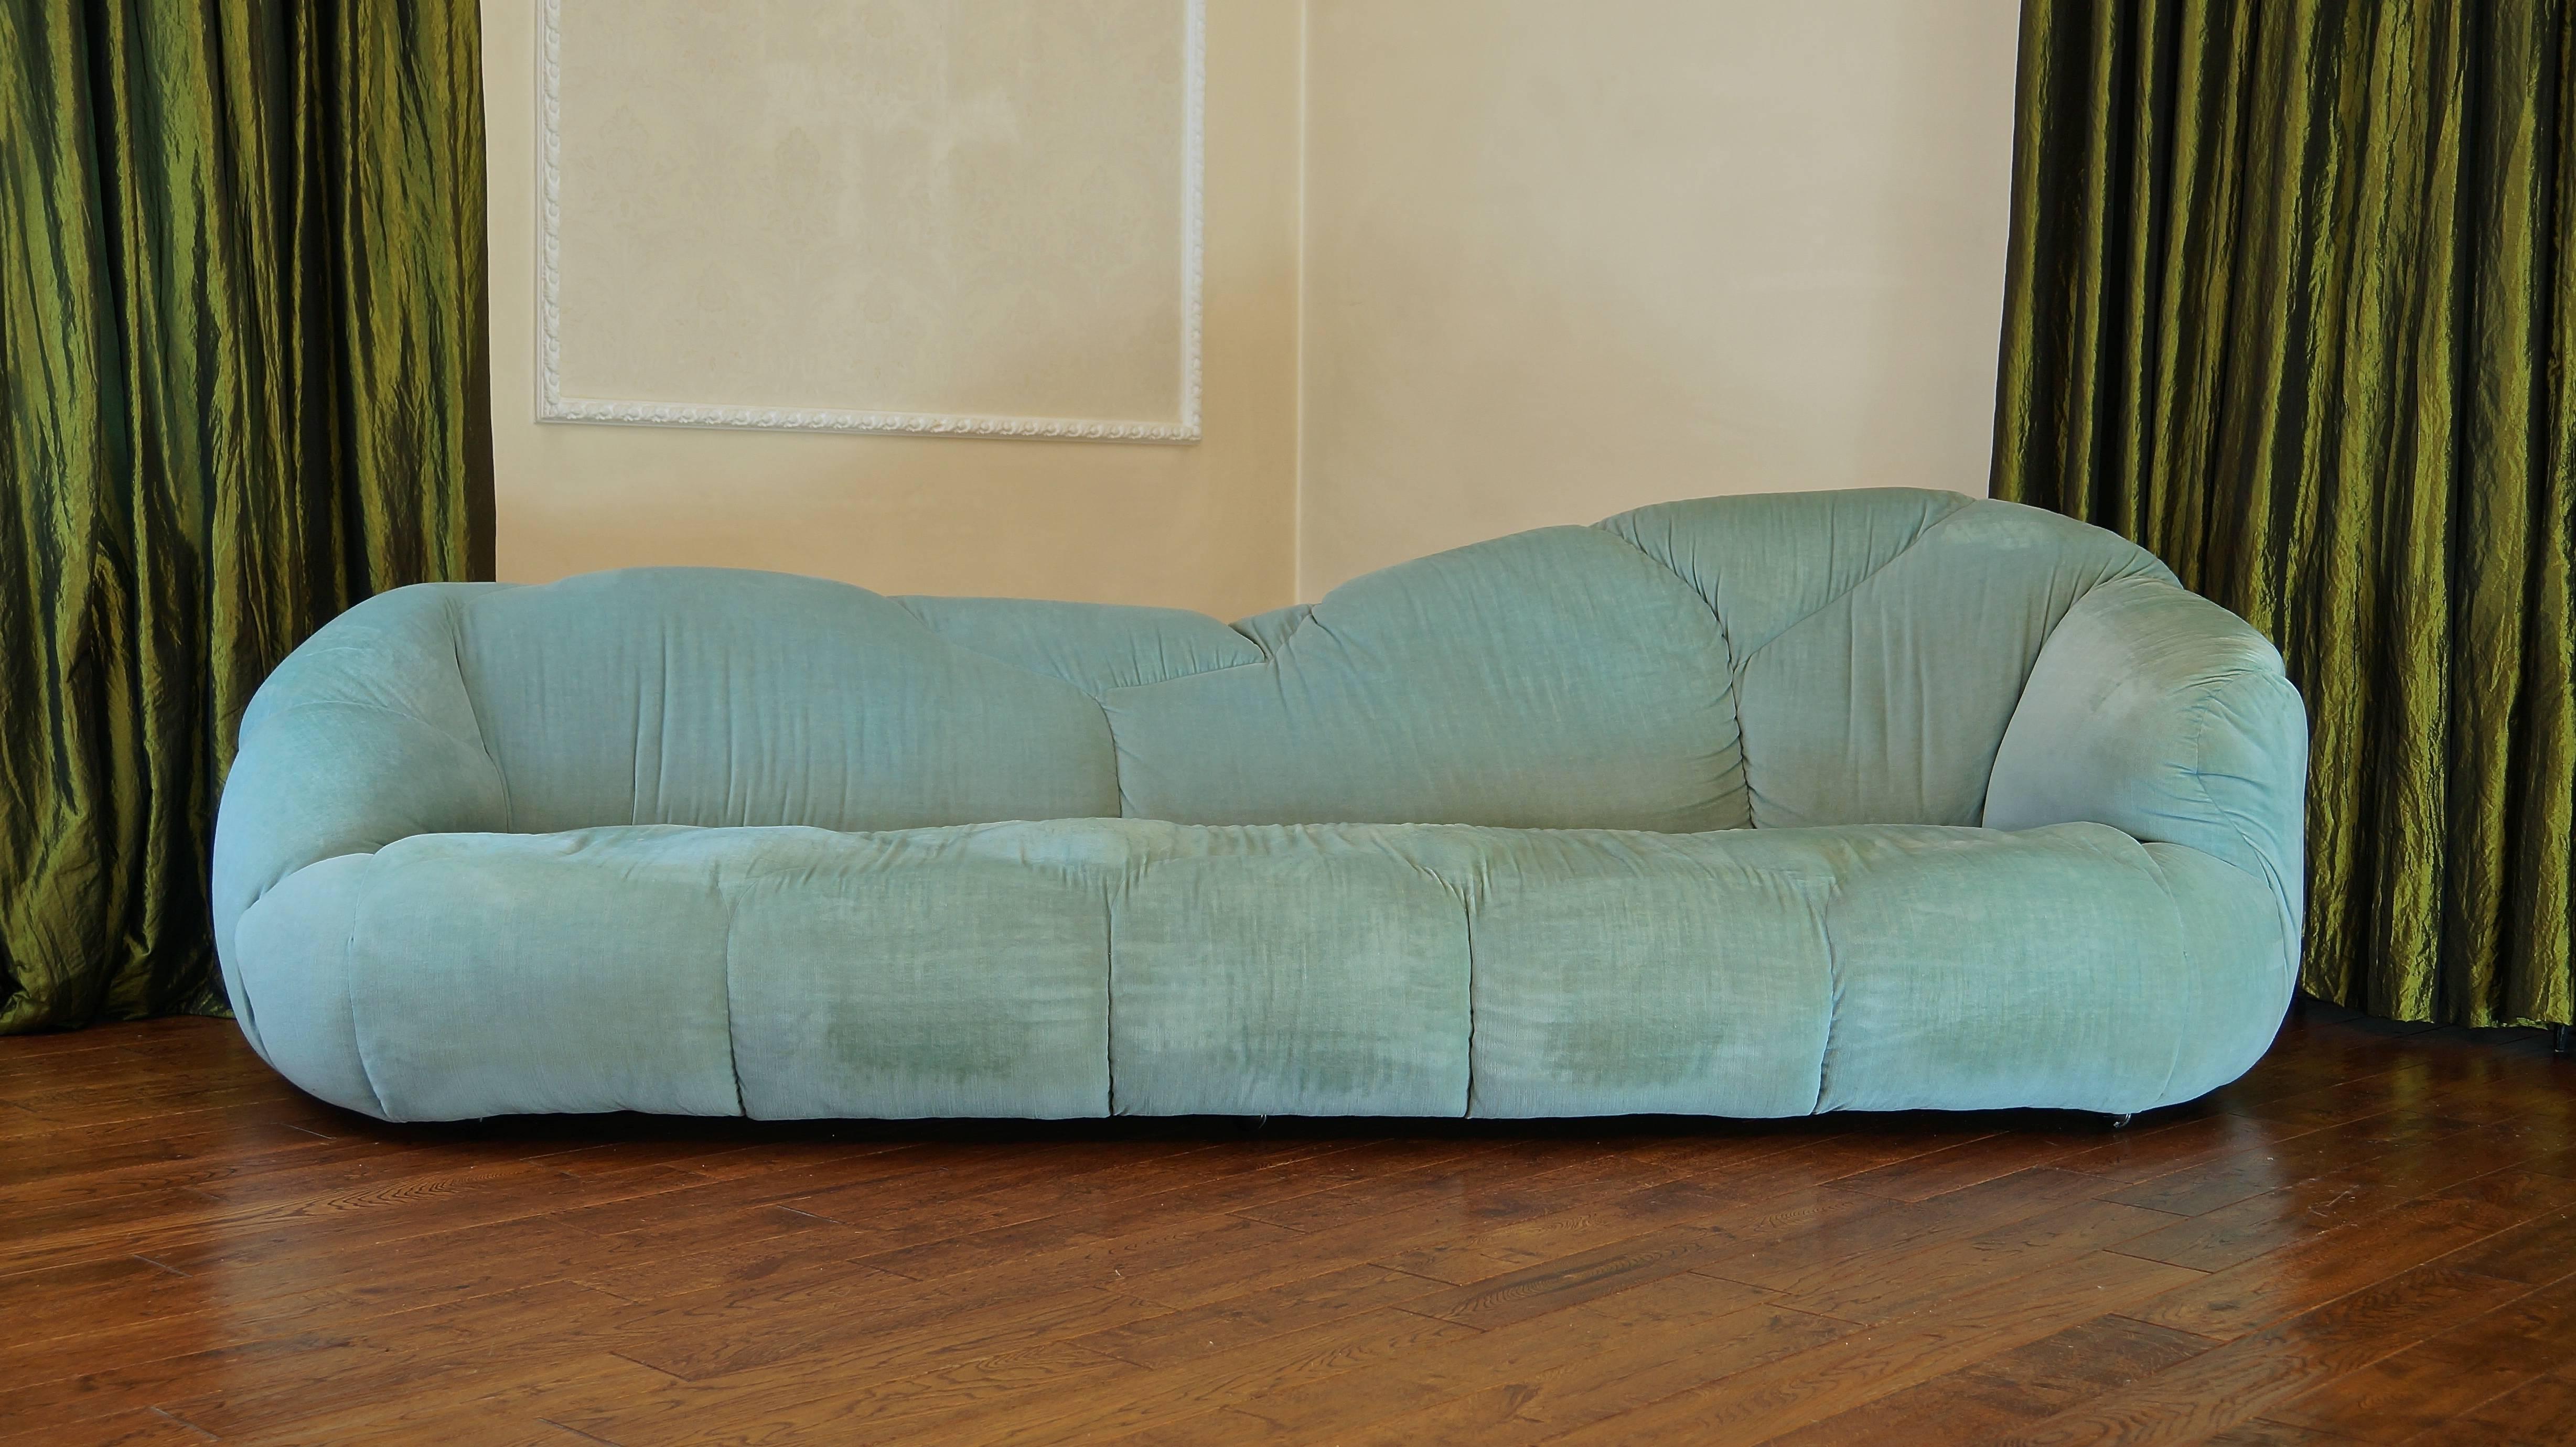 Vintage HK Cloud Sofa Suite, Howard Keith, 1970s, Chaise Longue, Couch, Armchair In Good Condition For Sale In Huddersfield, GB